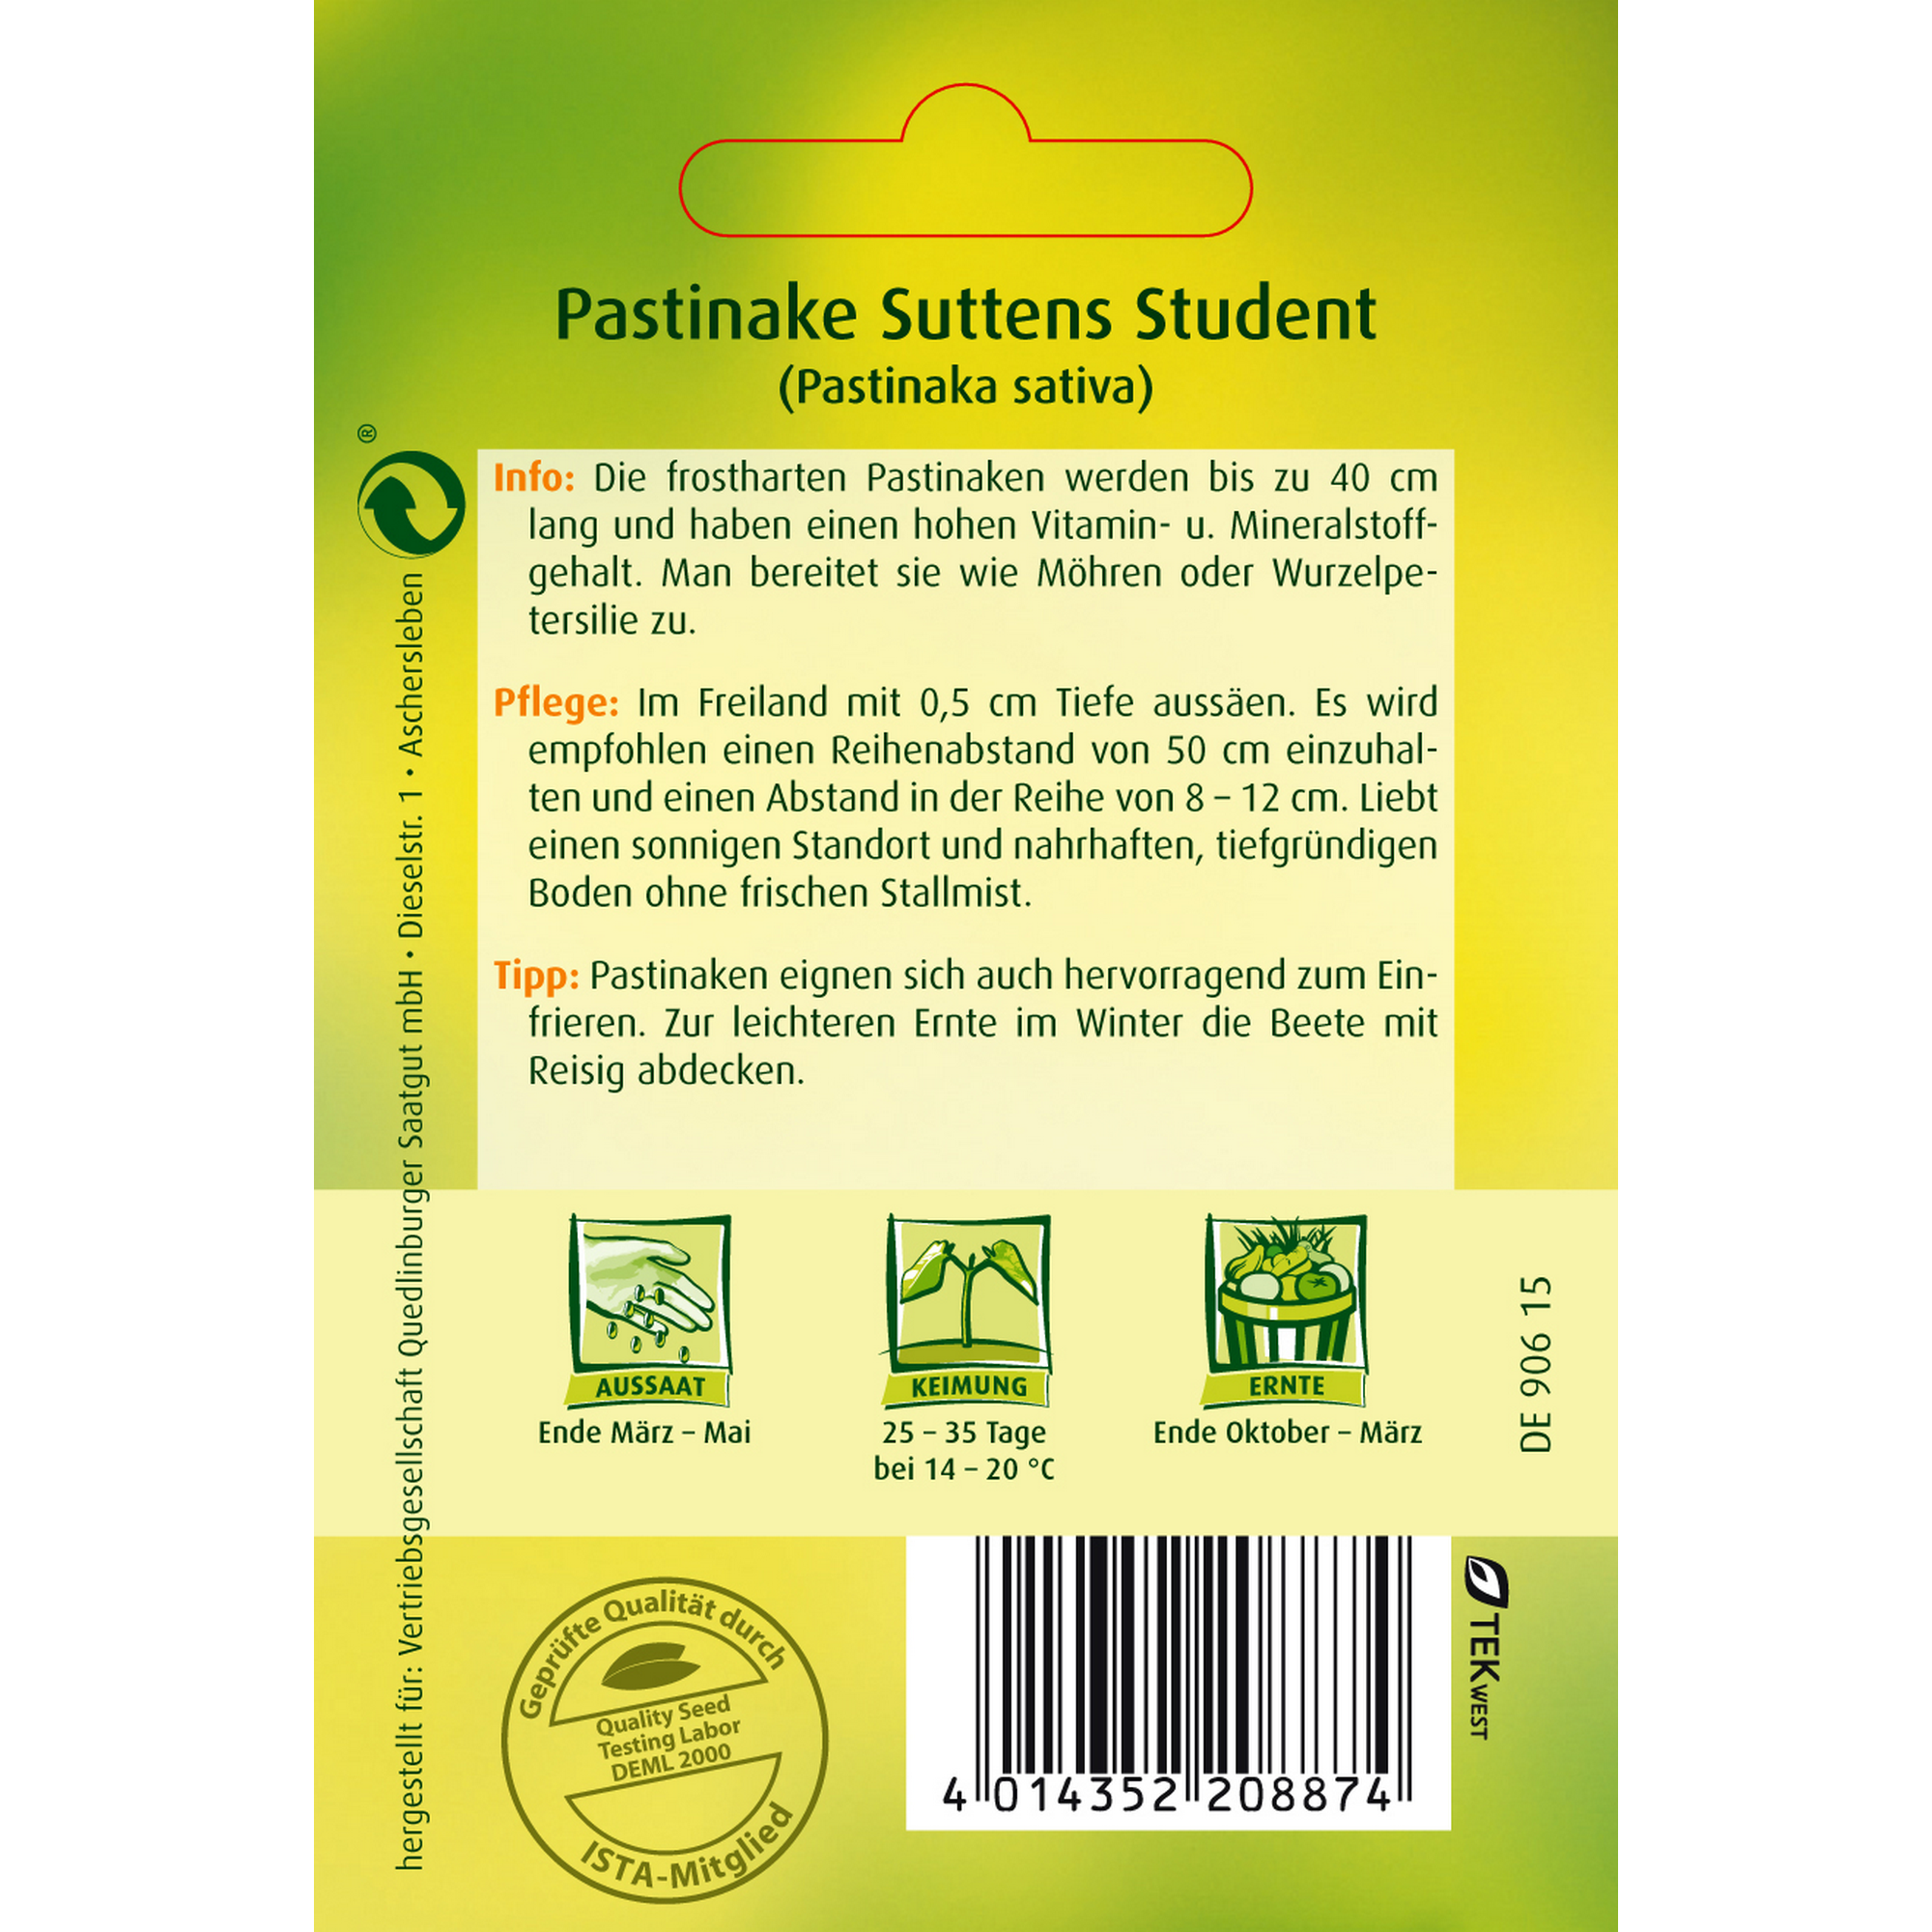 Pastinake 'Sutten Student' + product picture